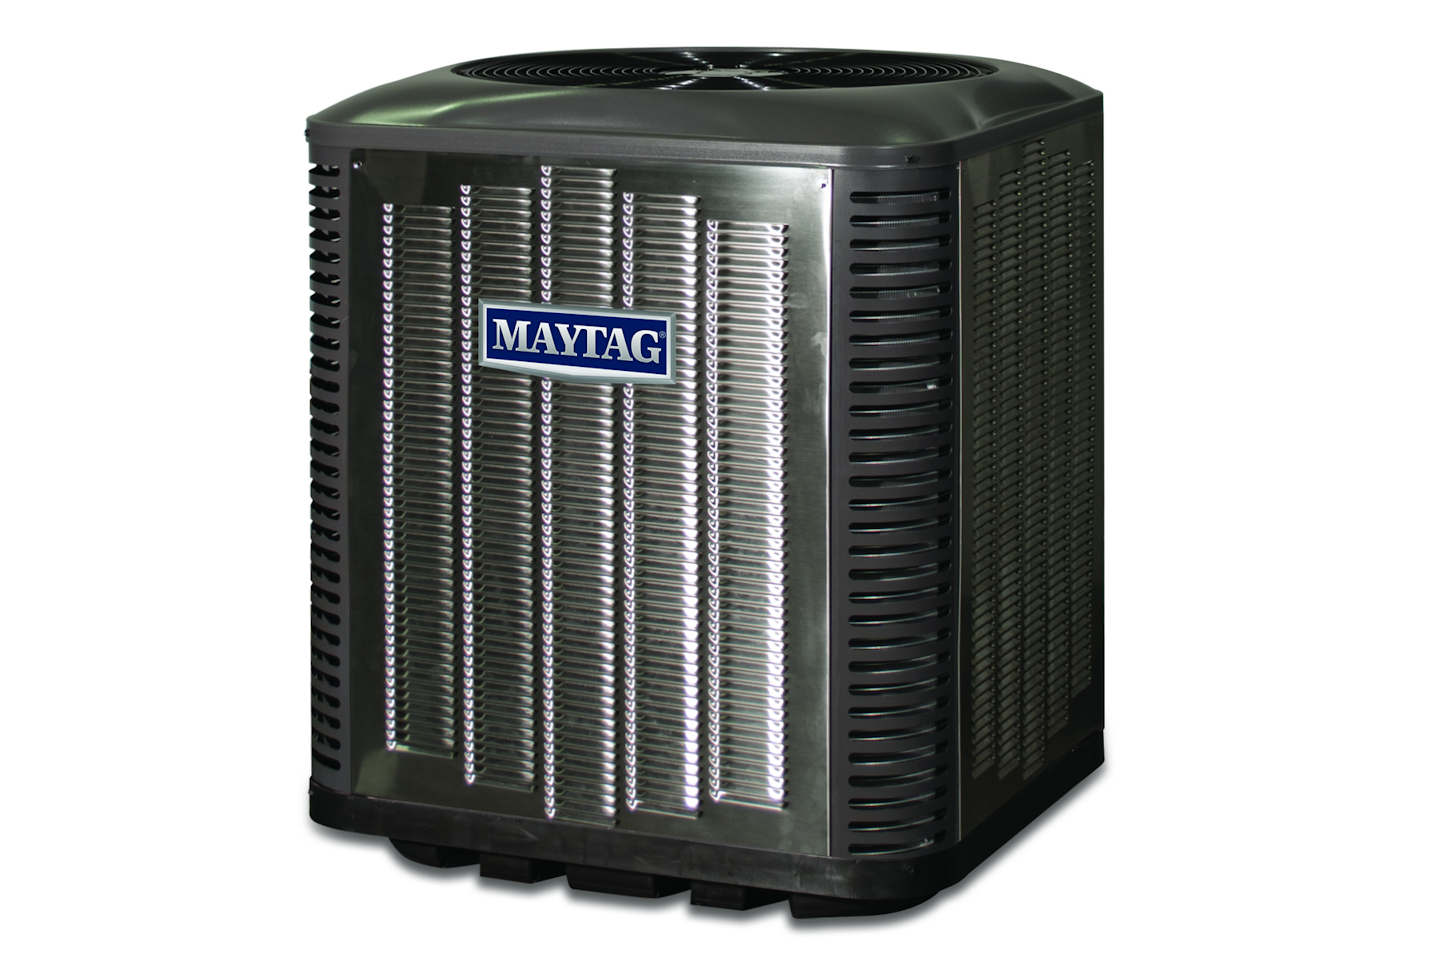 maytag-improves-access-with-new-jacket-designs-to-ac-heat-pump-systems